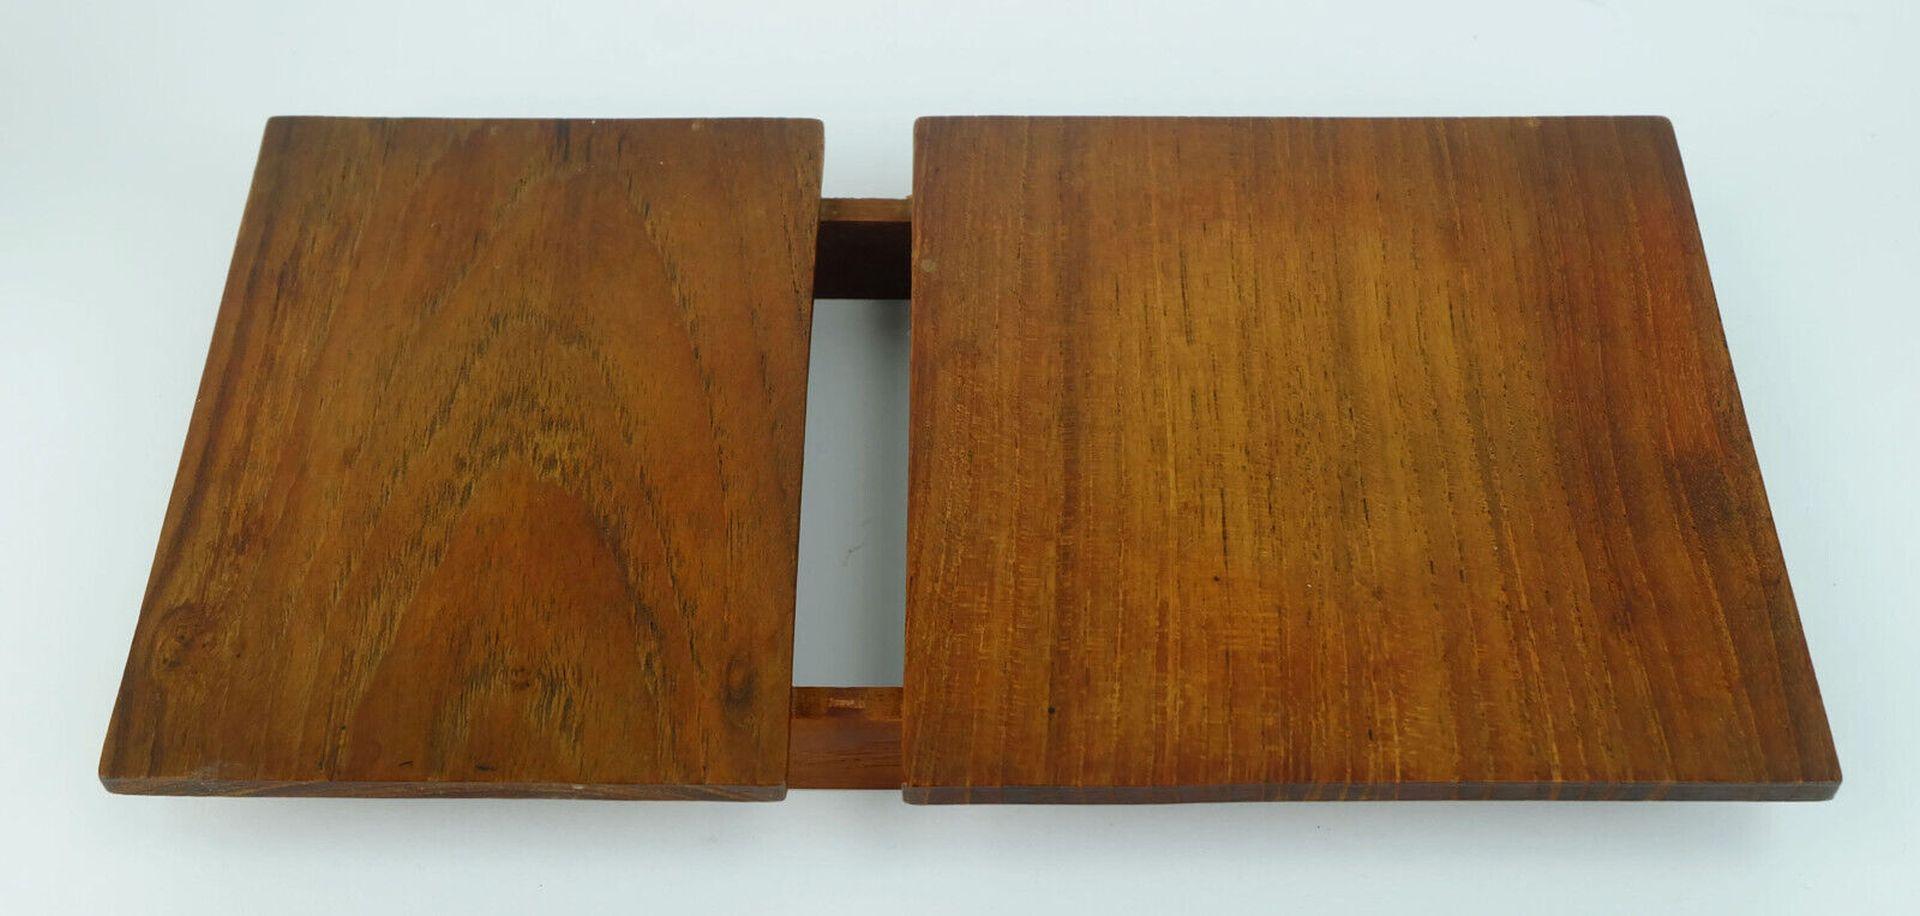 very rare danish modern SERVING SET laurids lonborg ceramic and wood 1960s For Sale 4